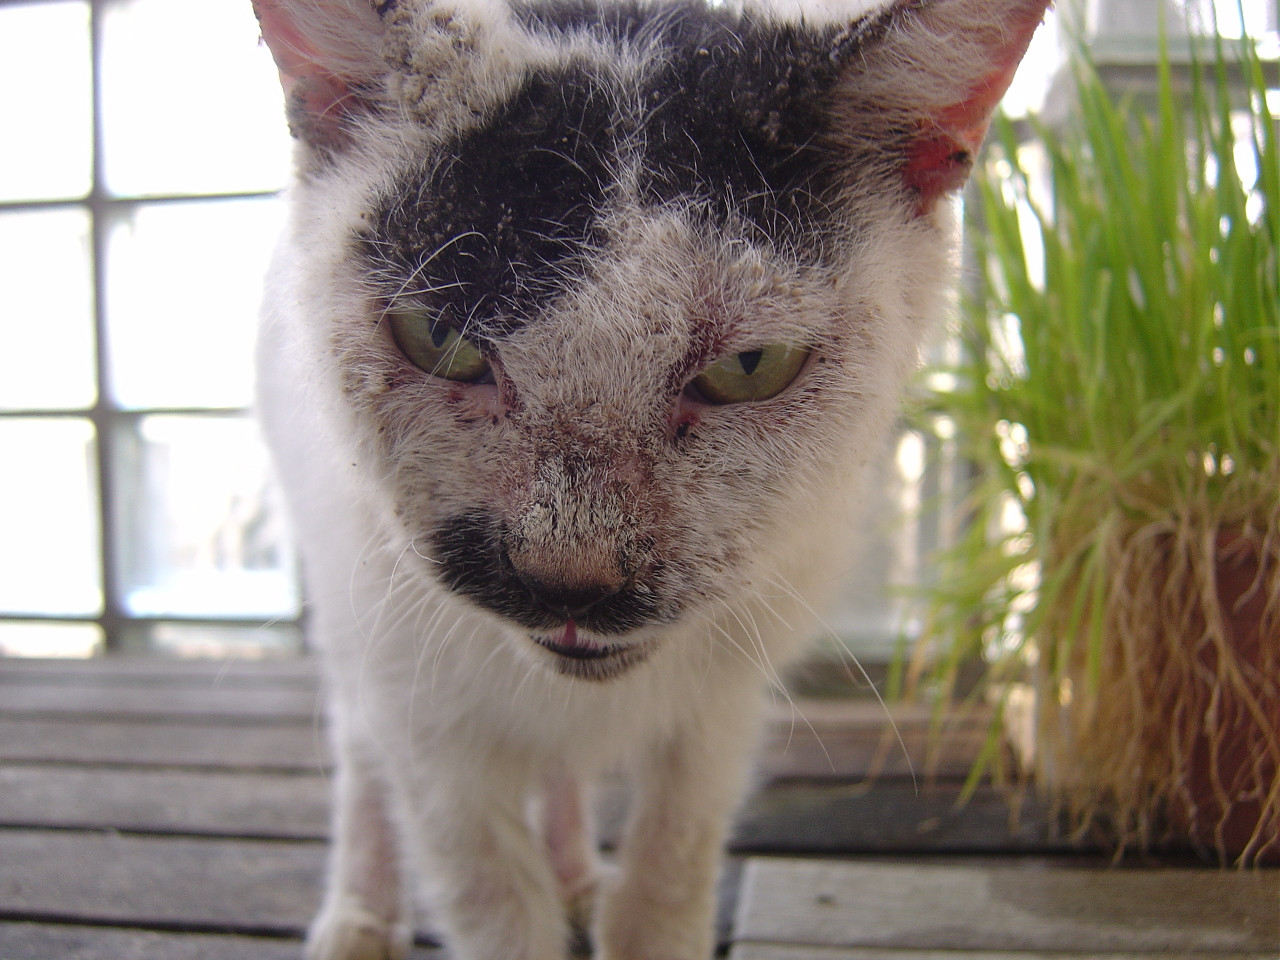 hardened homeless cat reed color with injuries to the ear ...